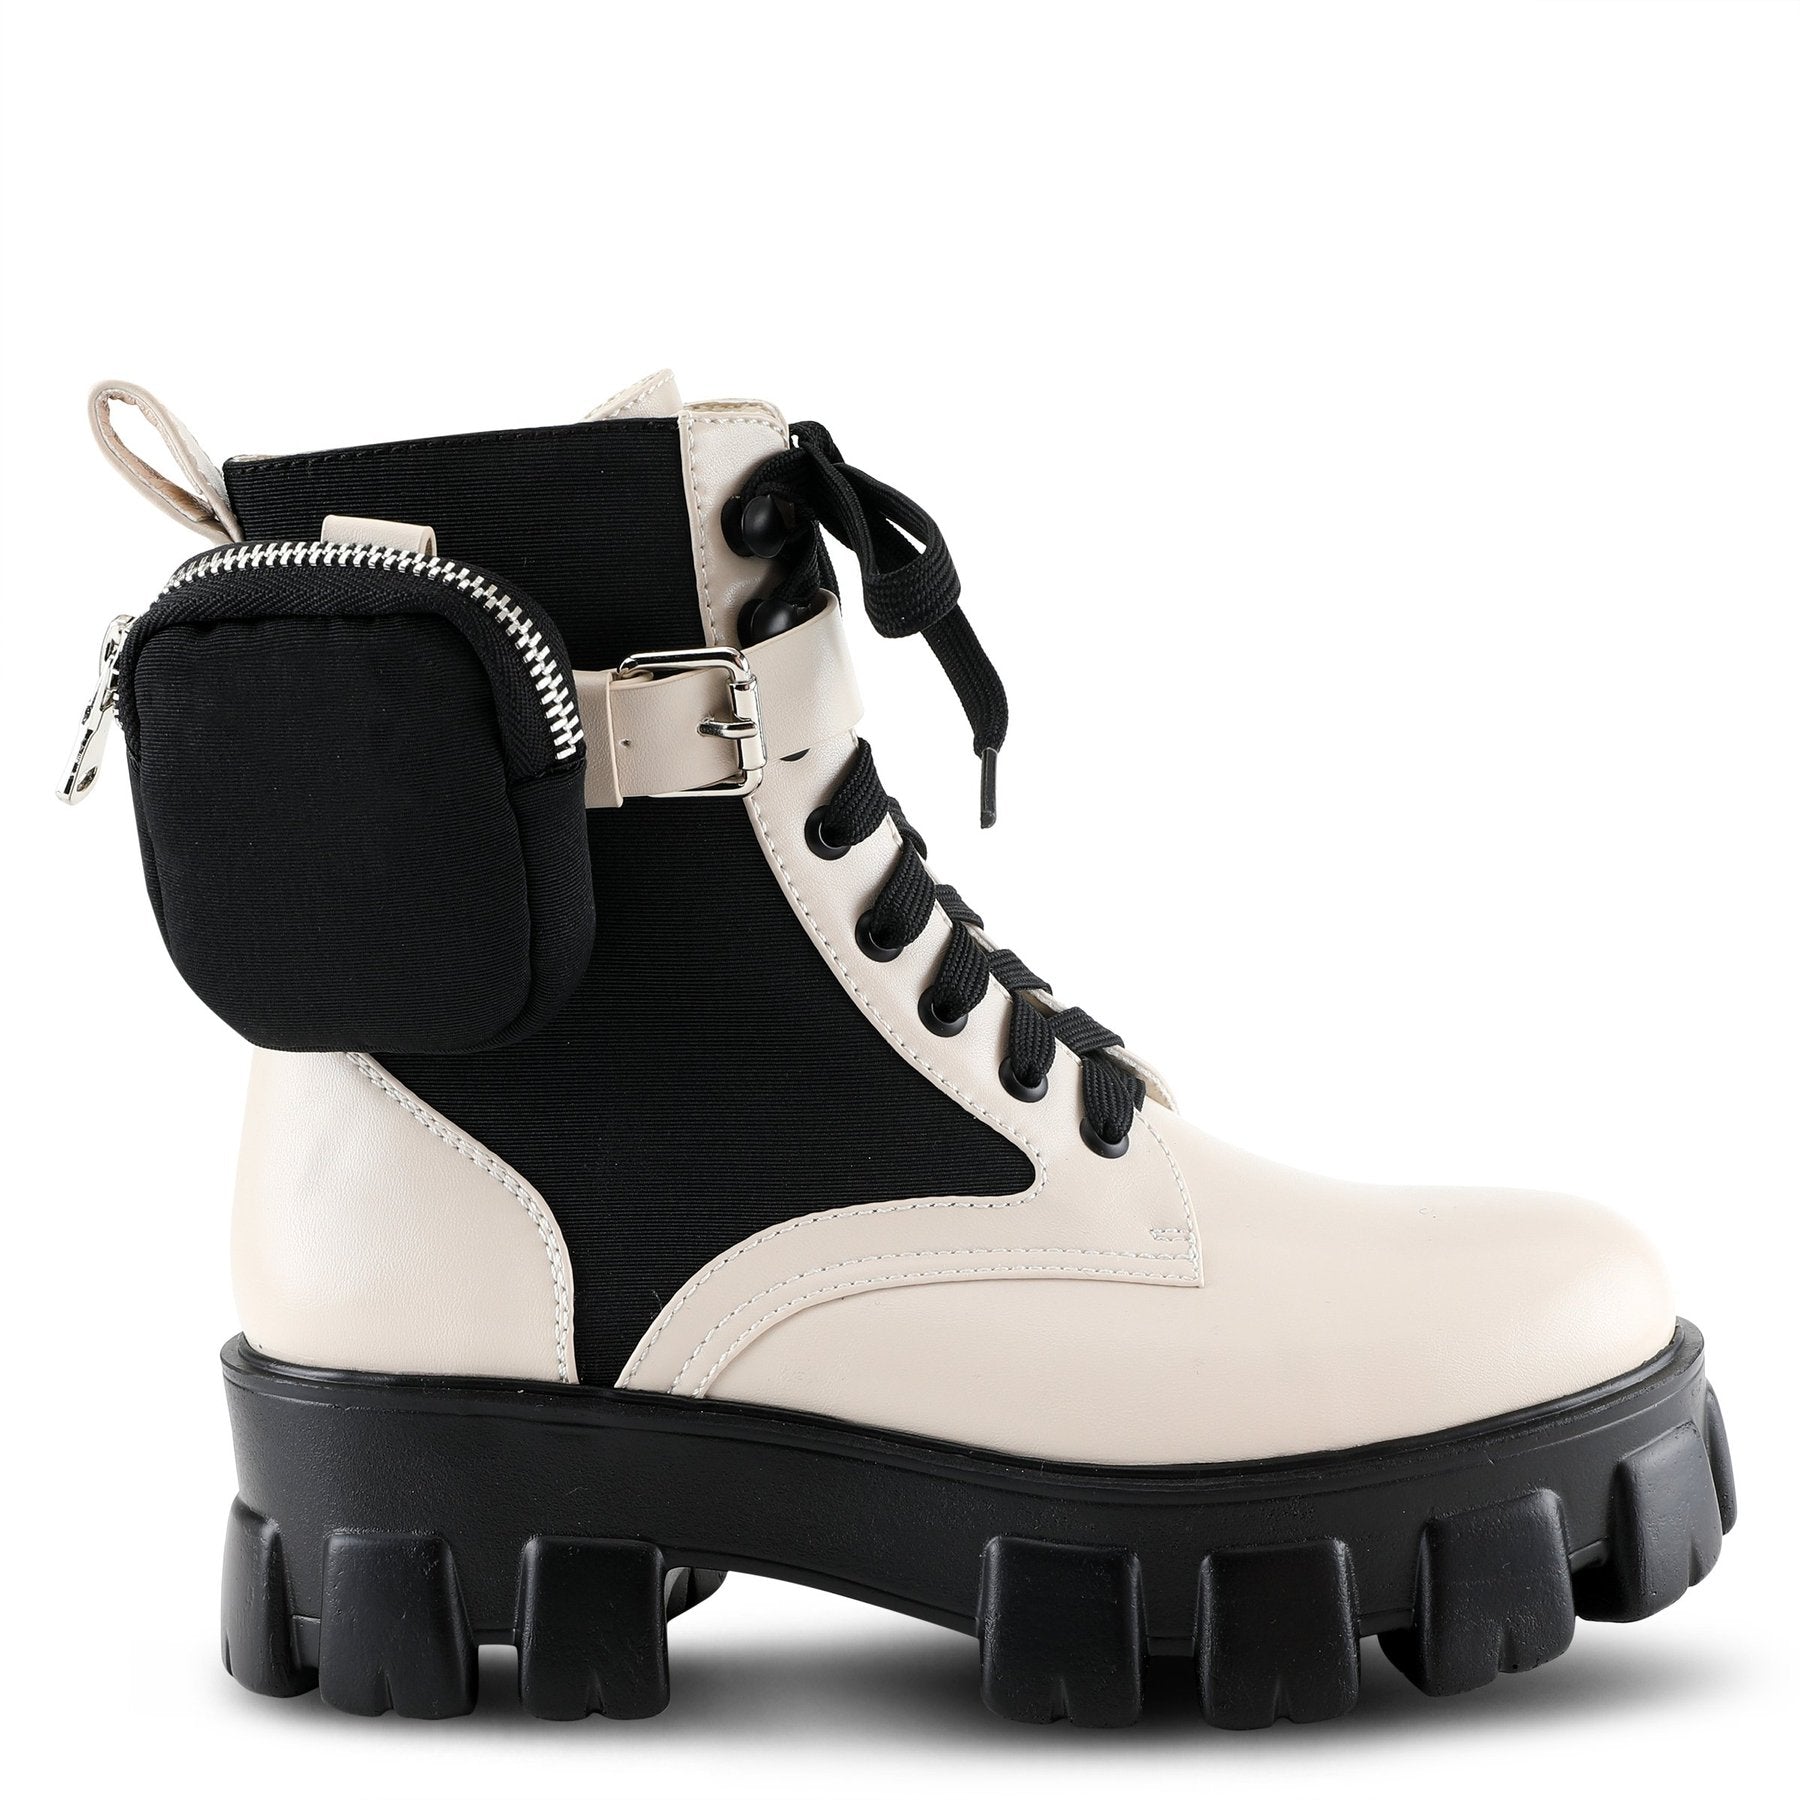 Outer side view of the azura stoked boot. This boot is beige and black with a black lace up front and a black lug sole. The boot has a decorative strap around the ankle with a mini zip pouch attached. 